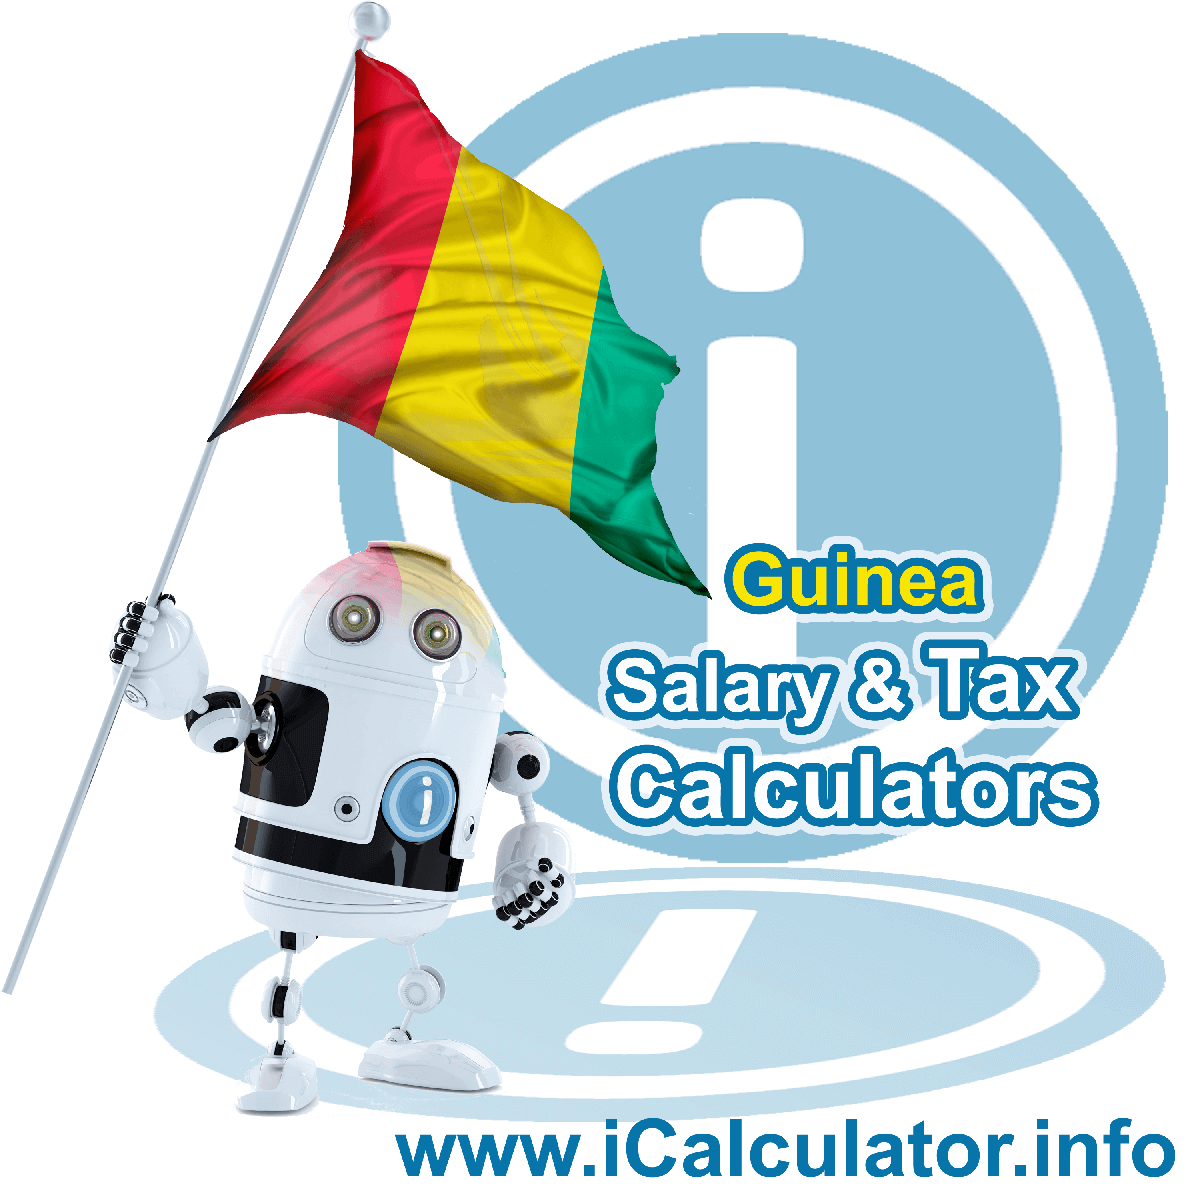 Guinea Wage Calculator. This image shows the Guinea flag and information relating to the tax formula for the Guinea Tax Calculator